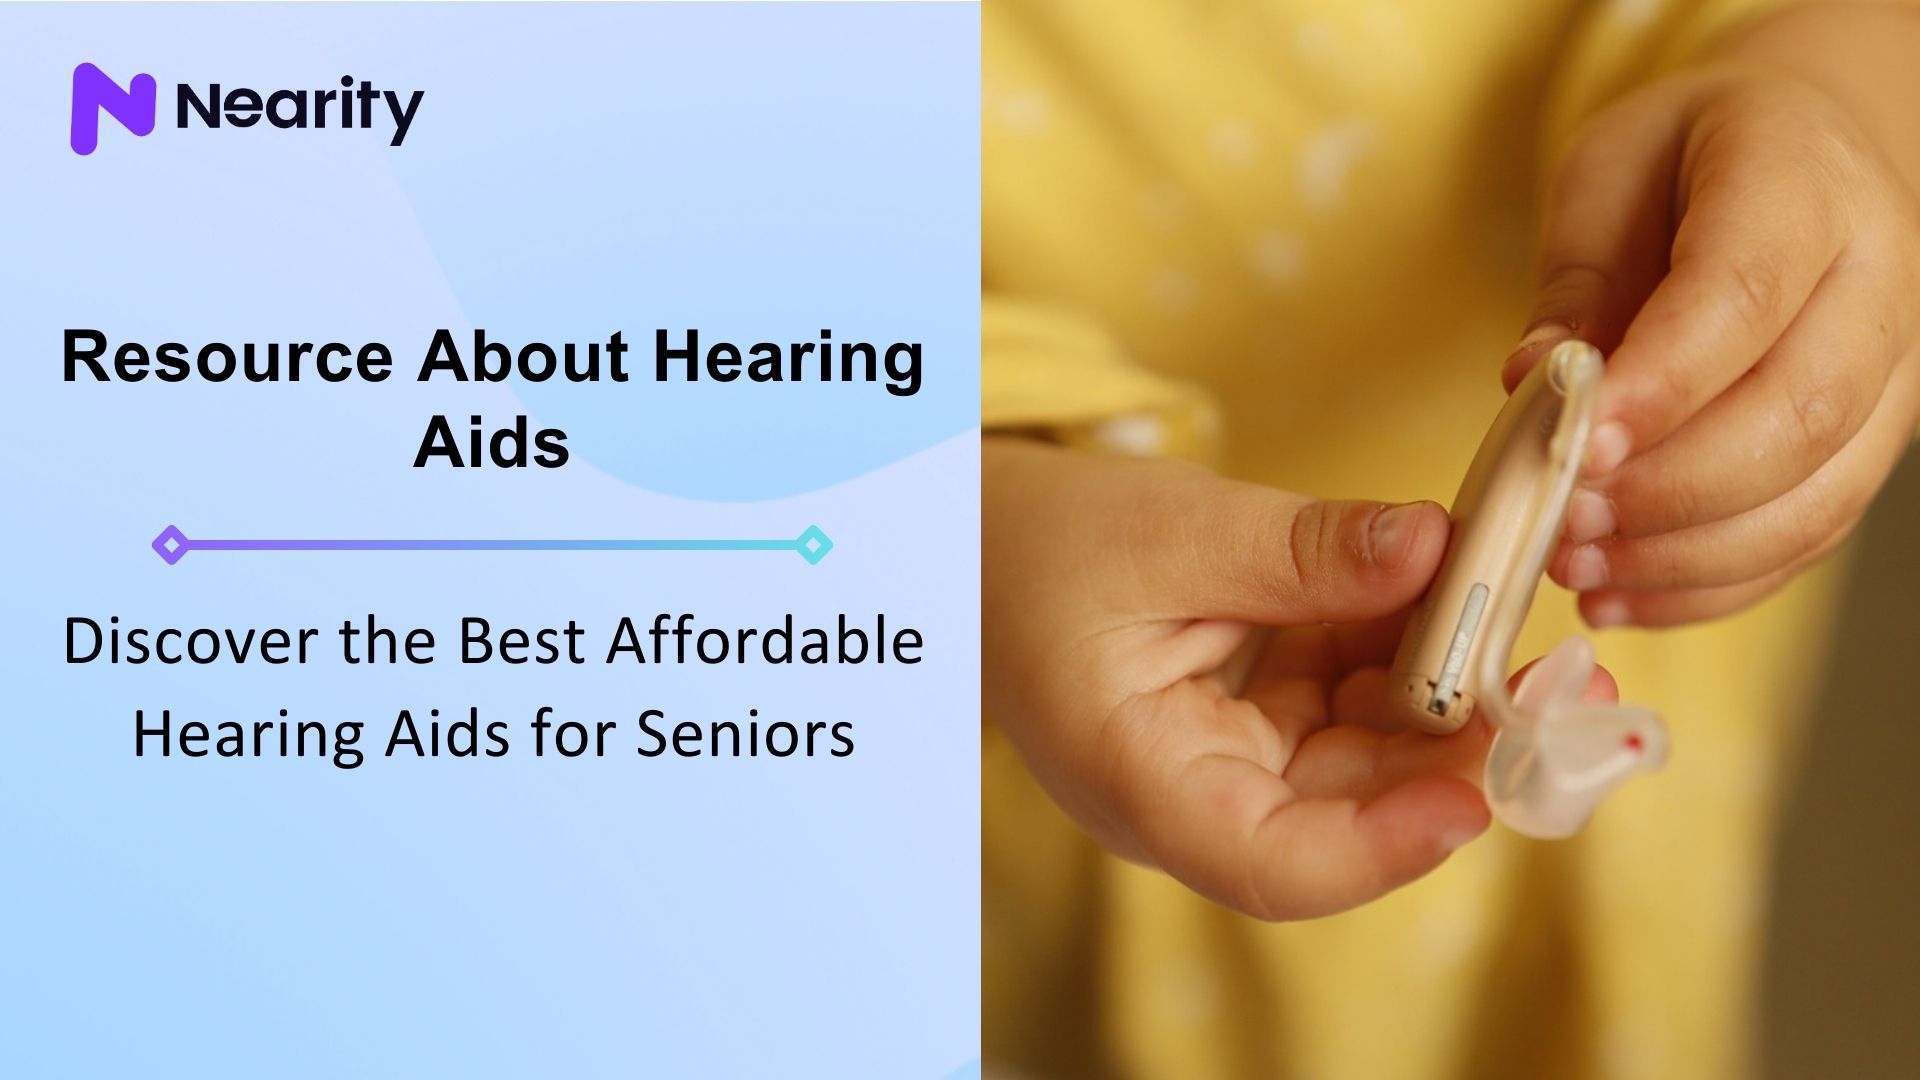 Discover the Best Affordable Hearing Aids for Seniors: Top Low-cost Options for Enhanced Hearing